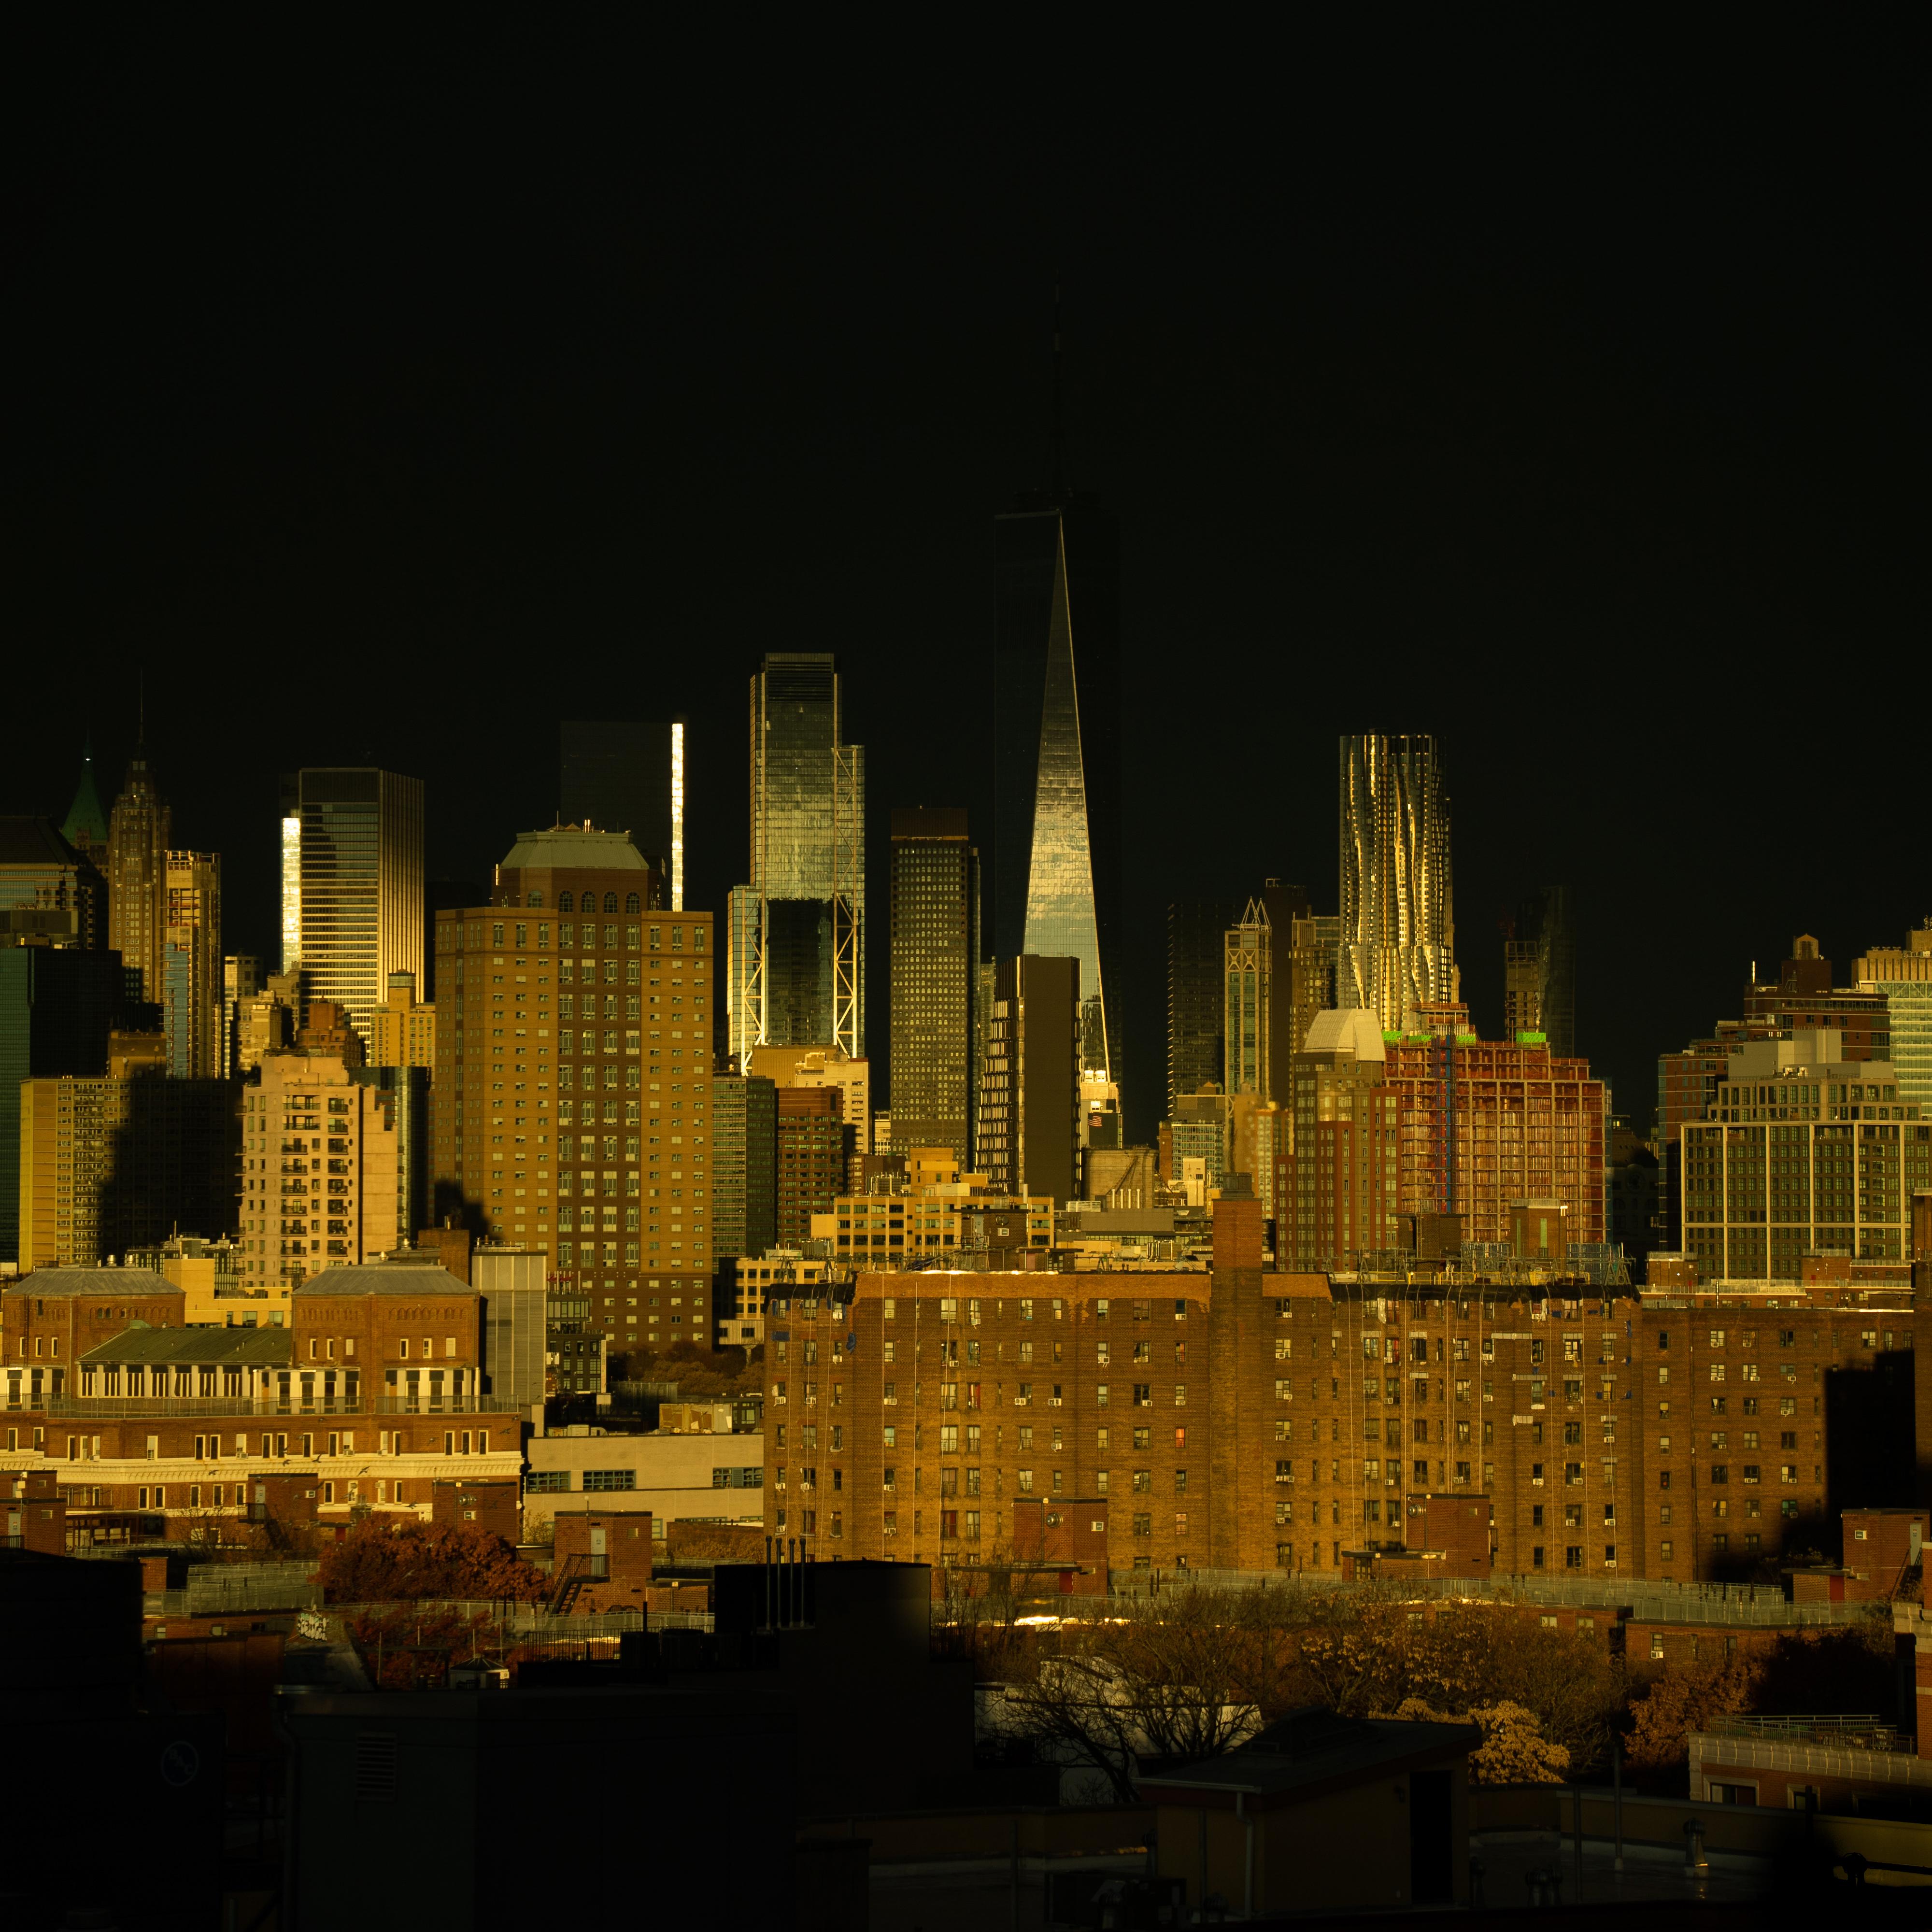 Brian Finke Color Photograph - Untitled (NYC no. 16)